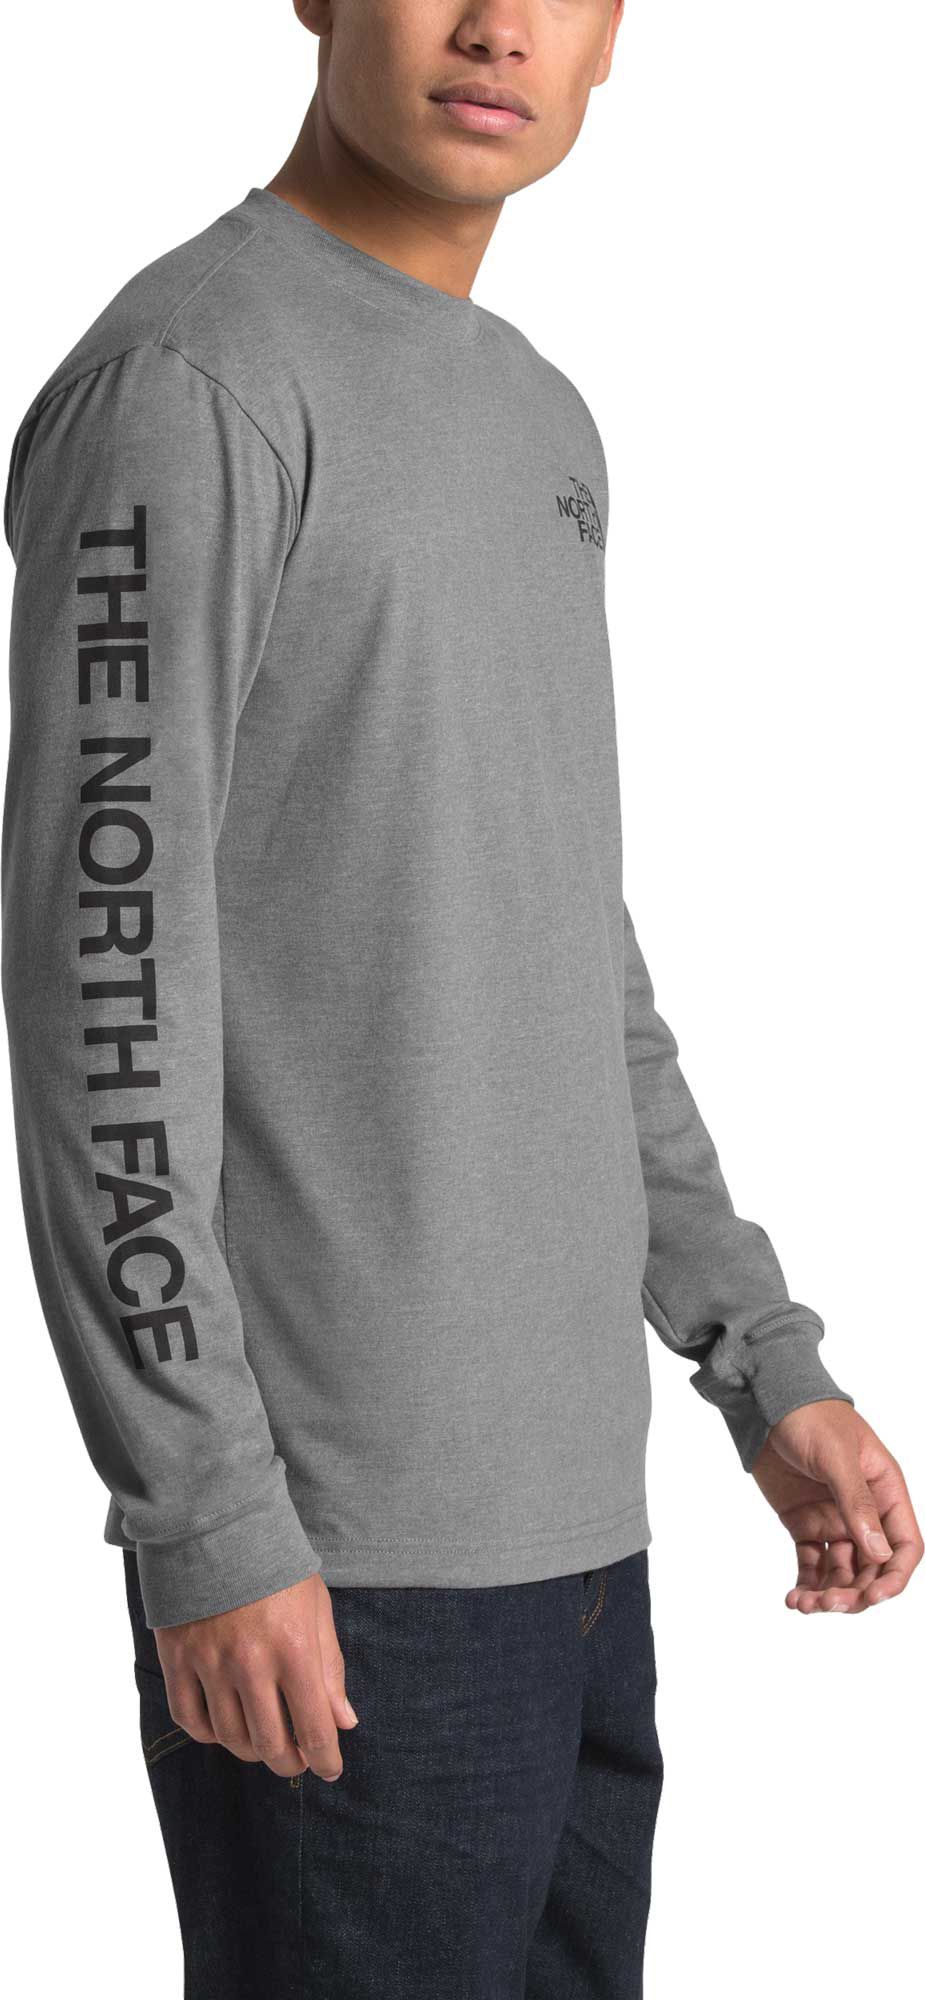 the north face sleeve